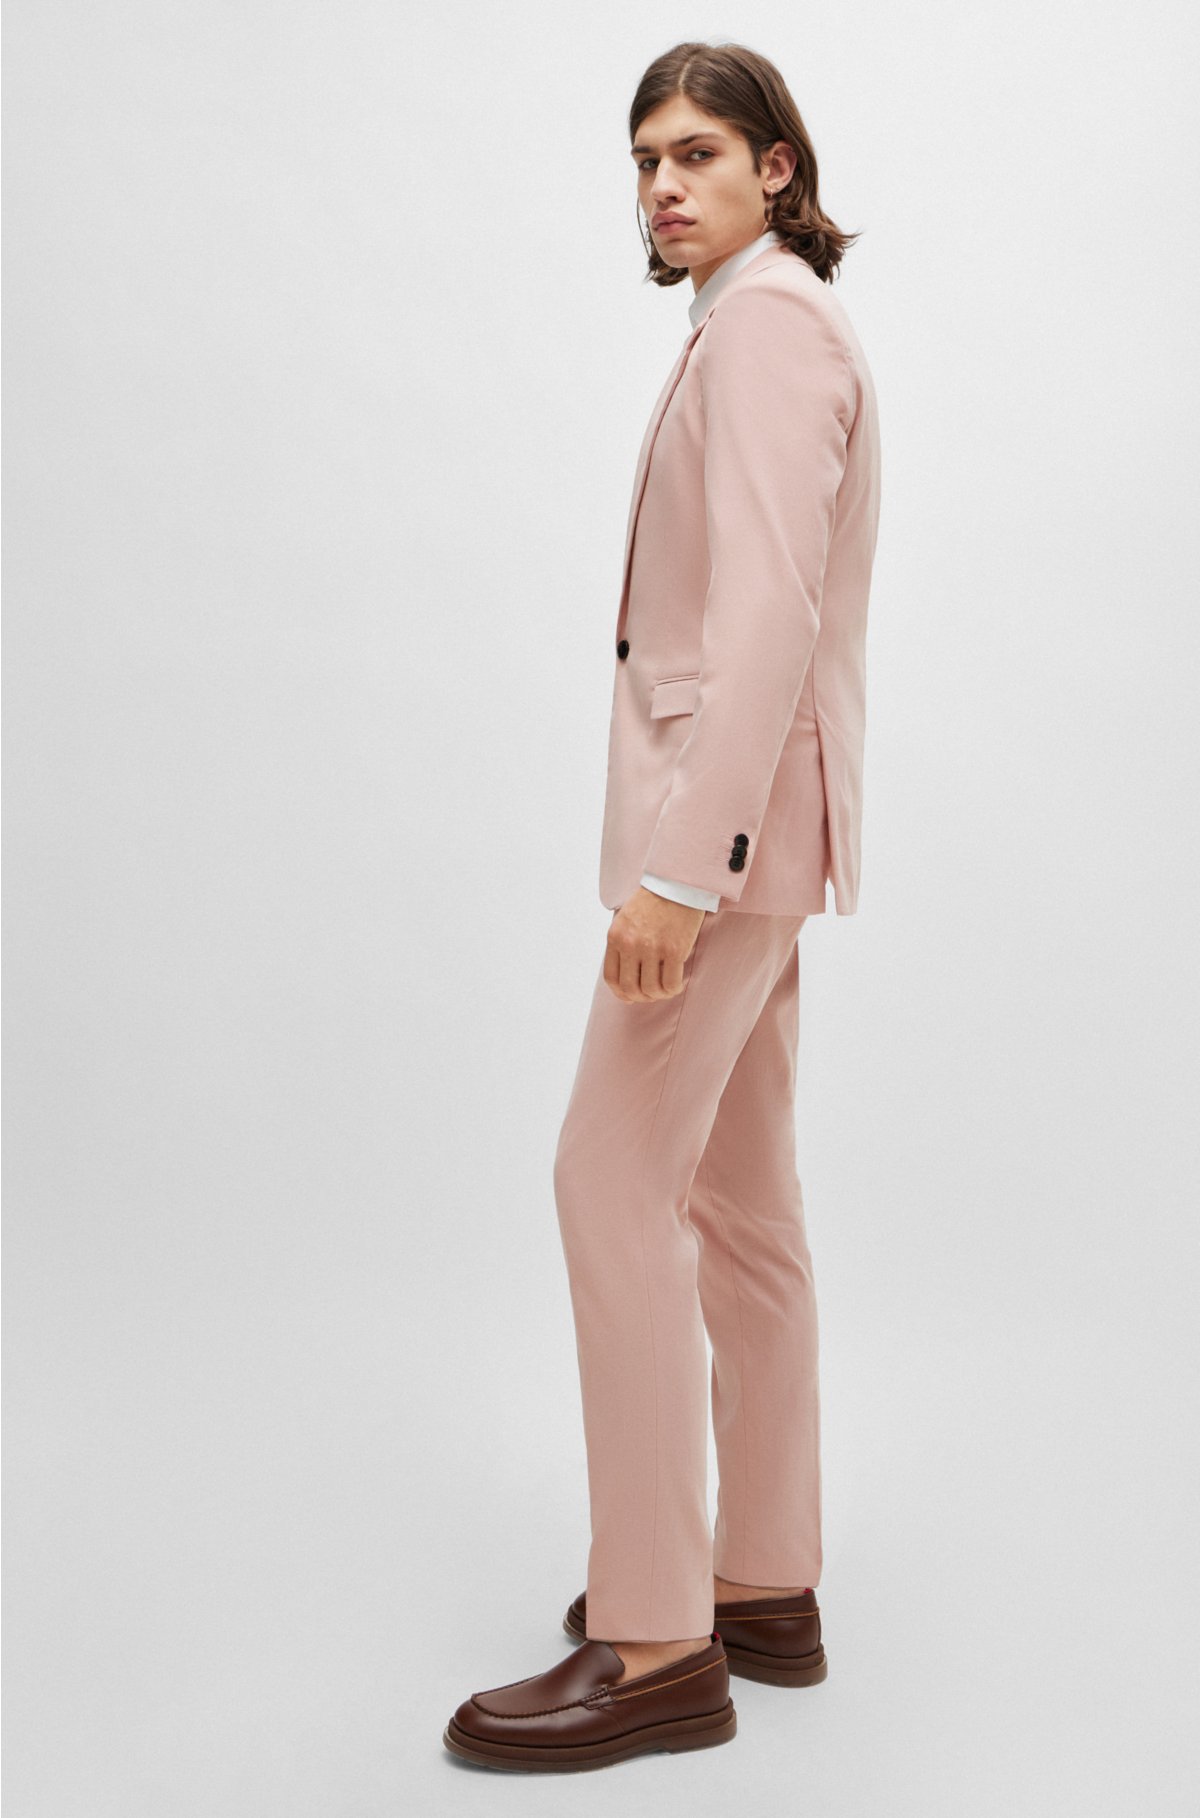 Extra-slim-fit suit in a lightweight cotton blend, light pink